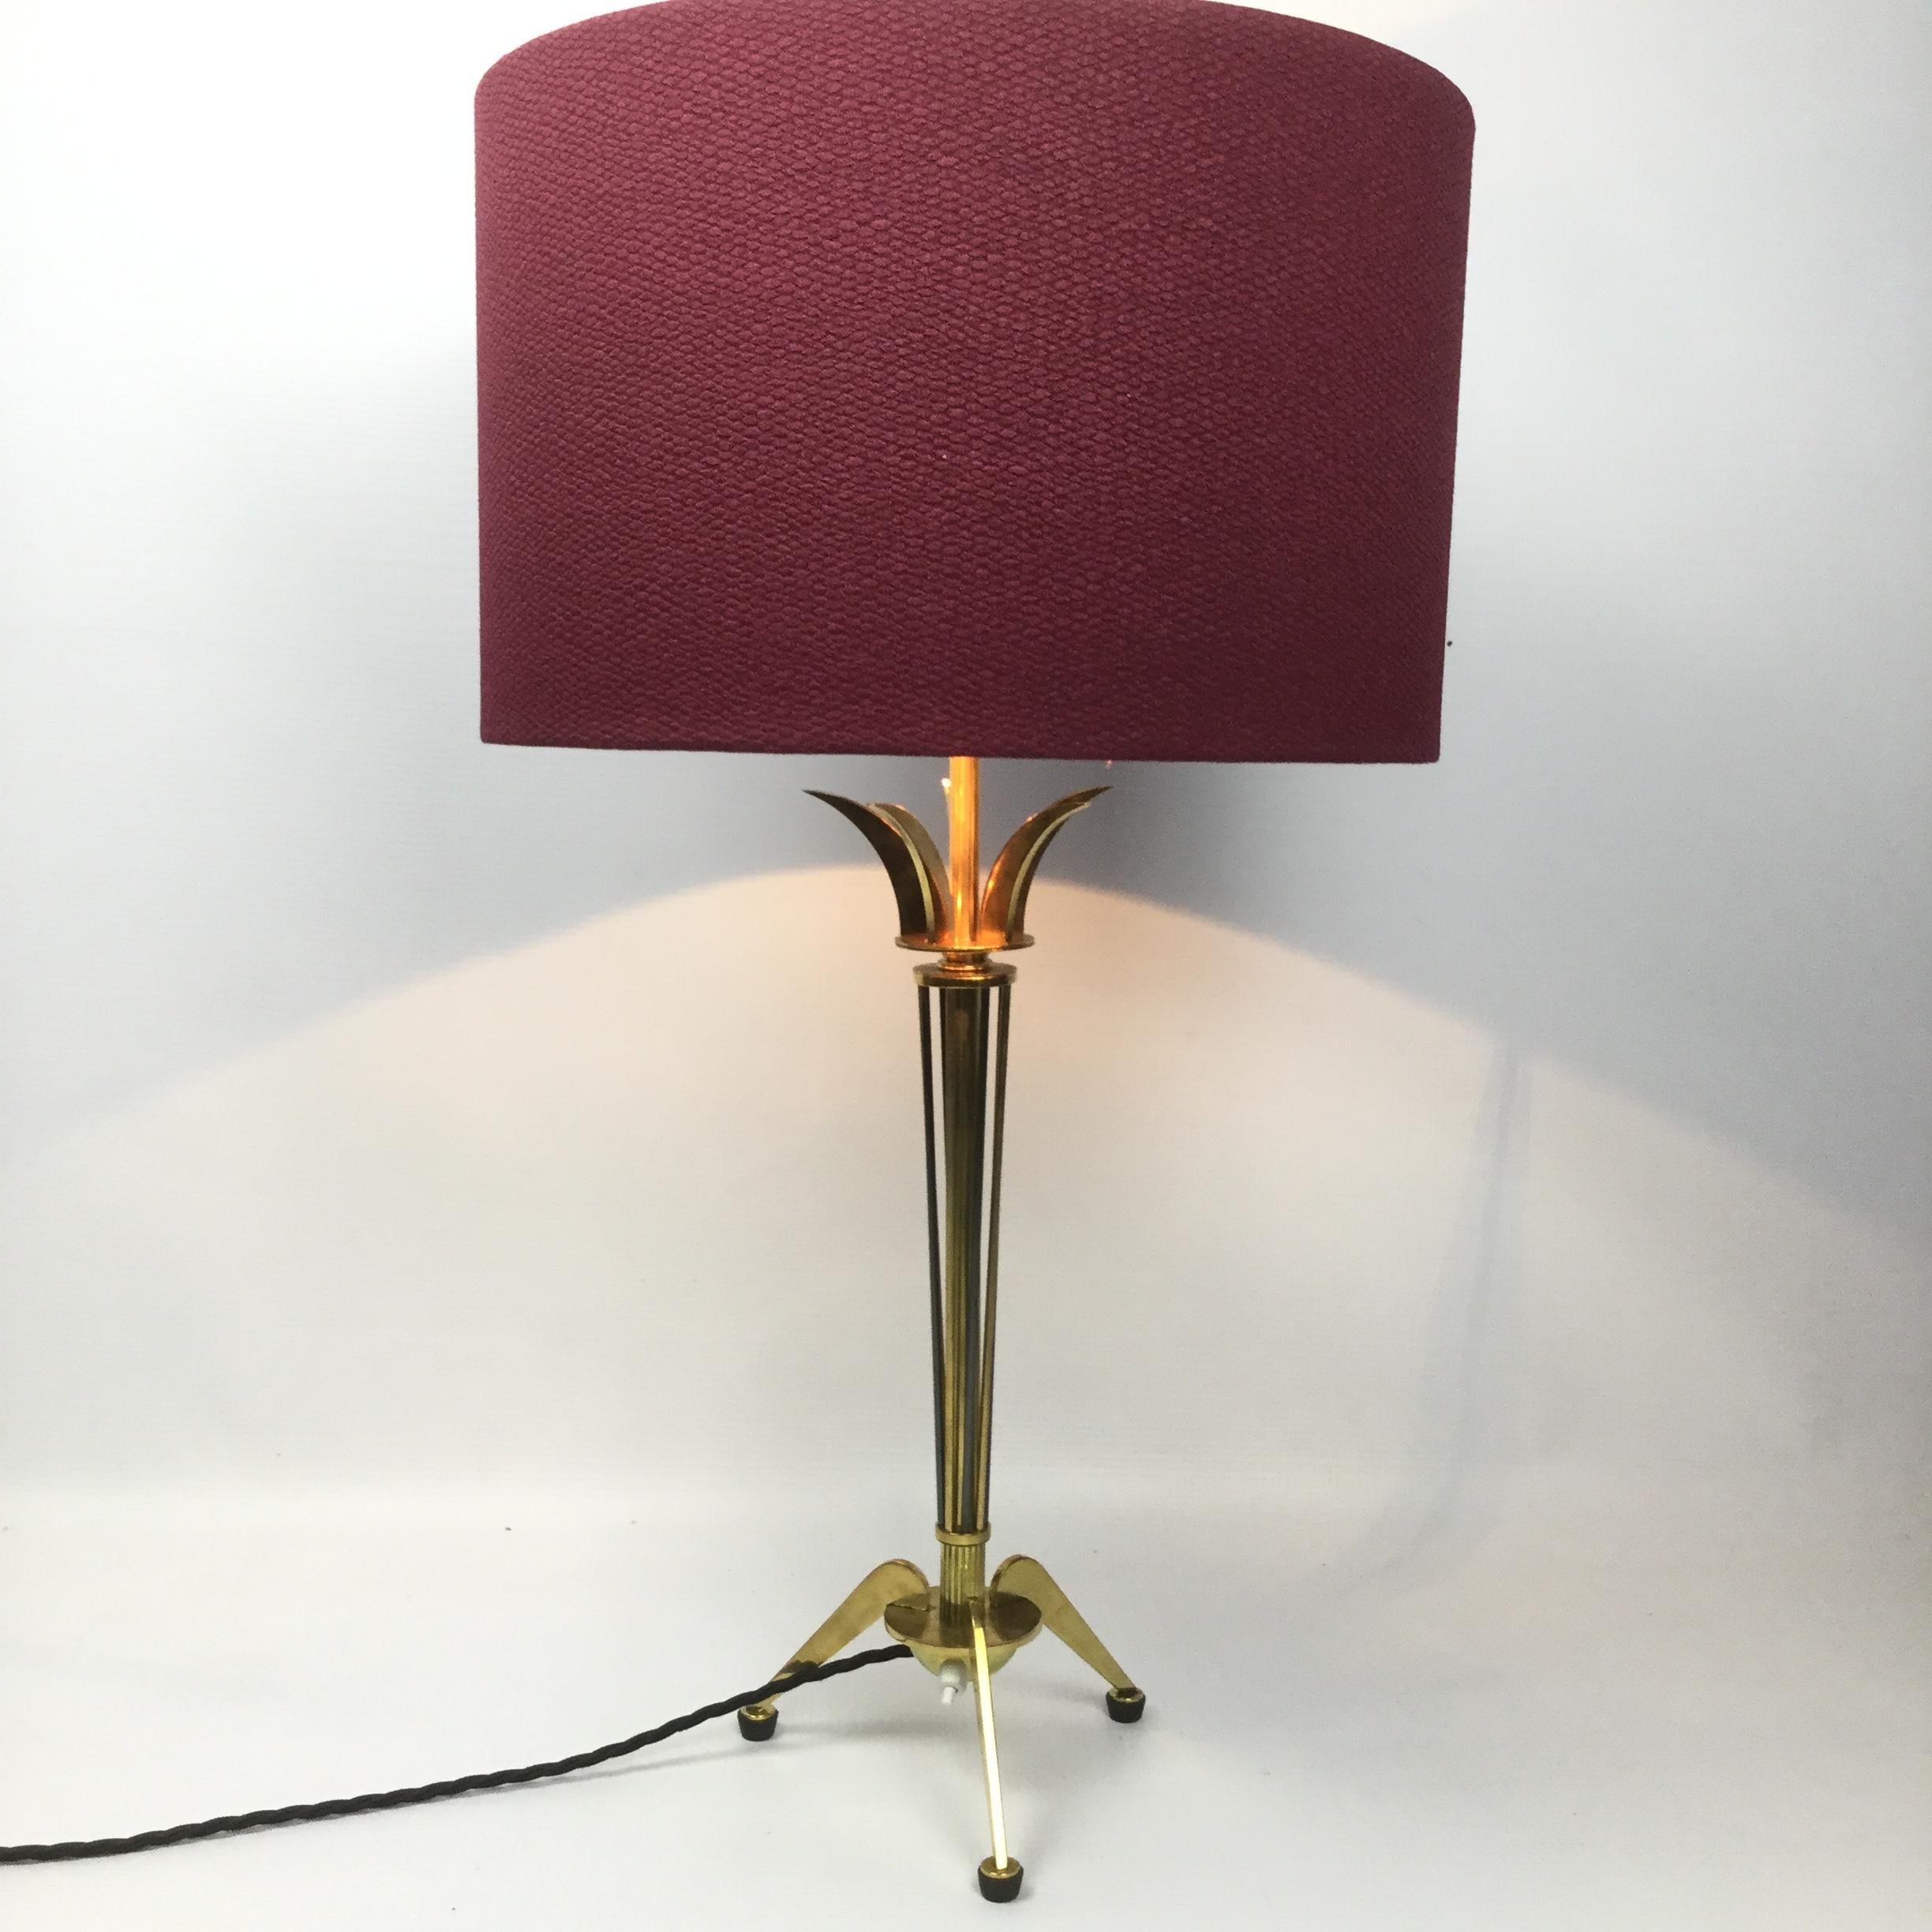 Pair of Brass Table Lamps by Maison Arlus for Maison Jansen, France, 1950s In Good Condition For Sale In London, GB